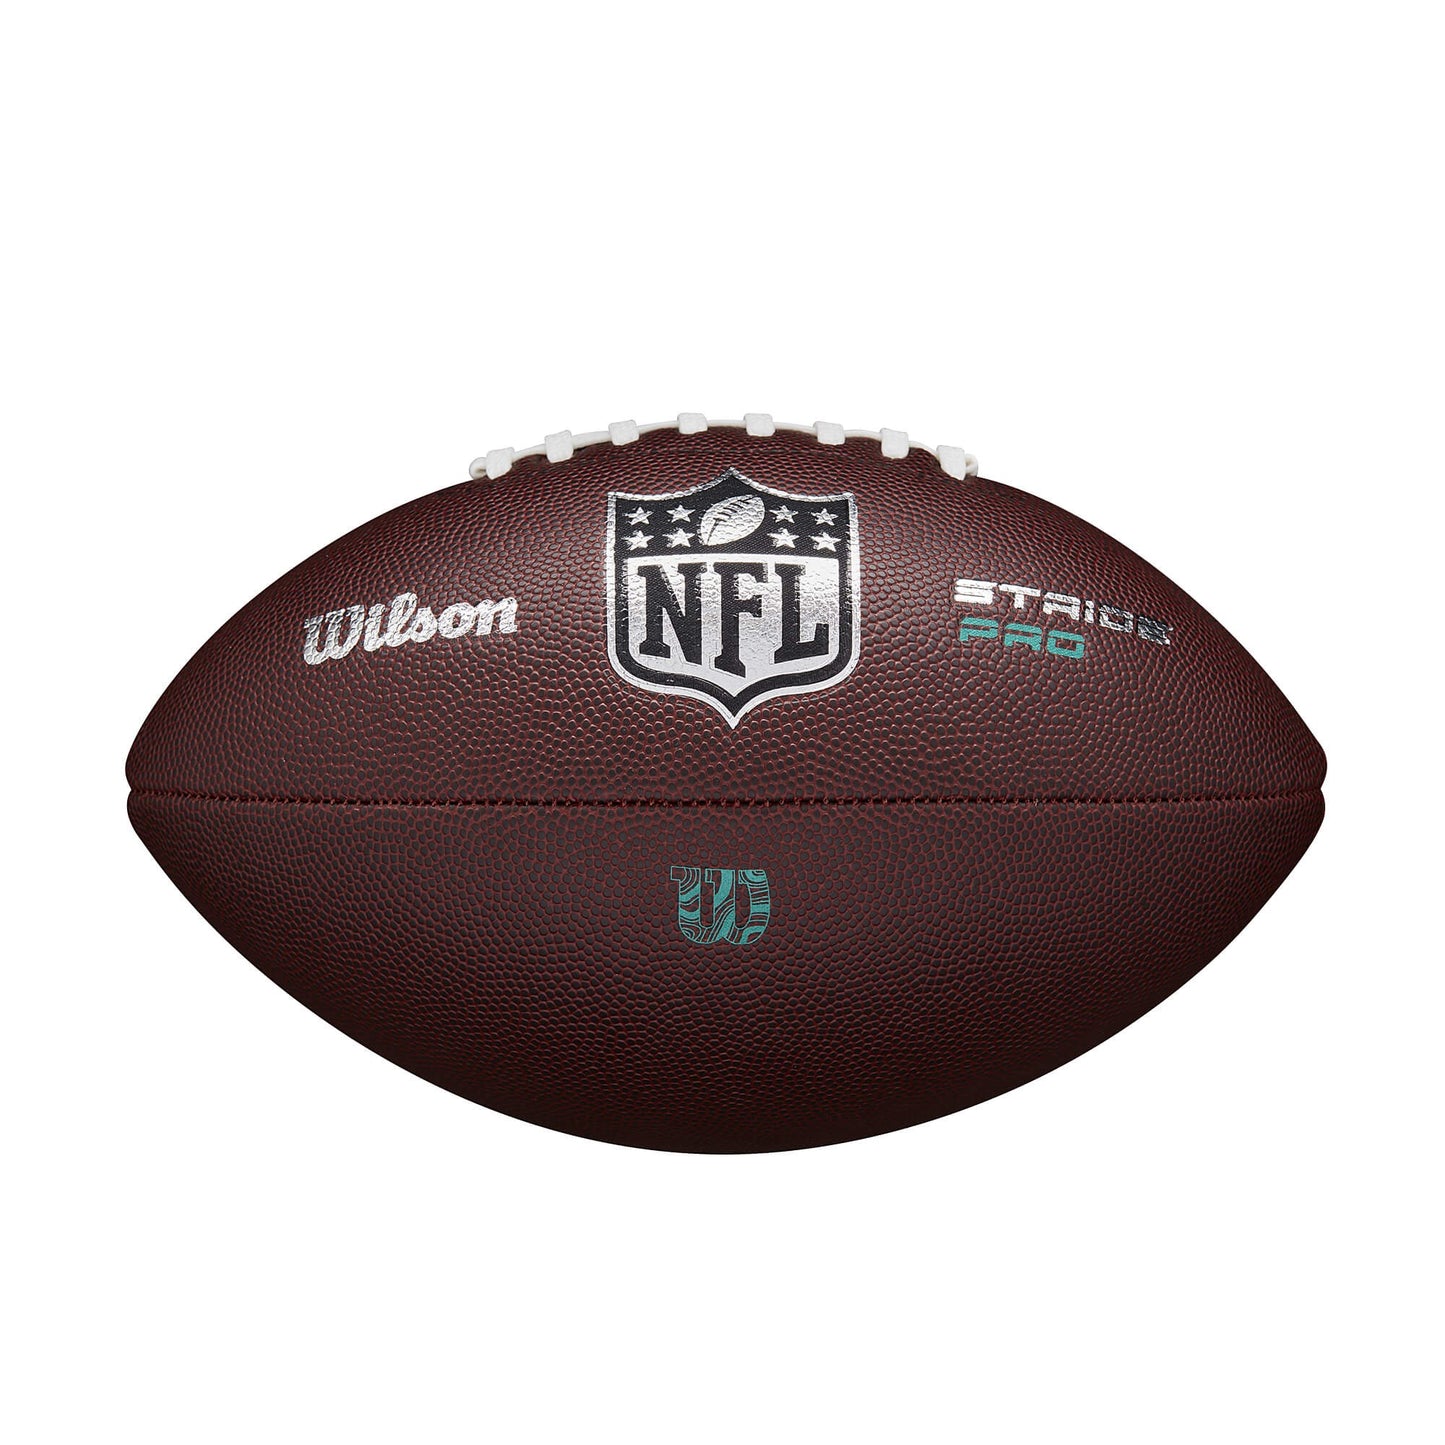 Wilson NFL Stride Pro Eco (sz. Official) Brown